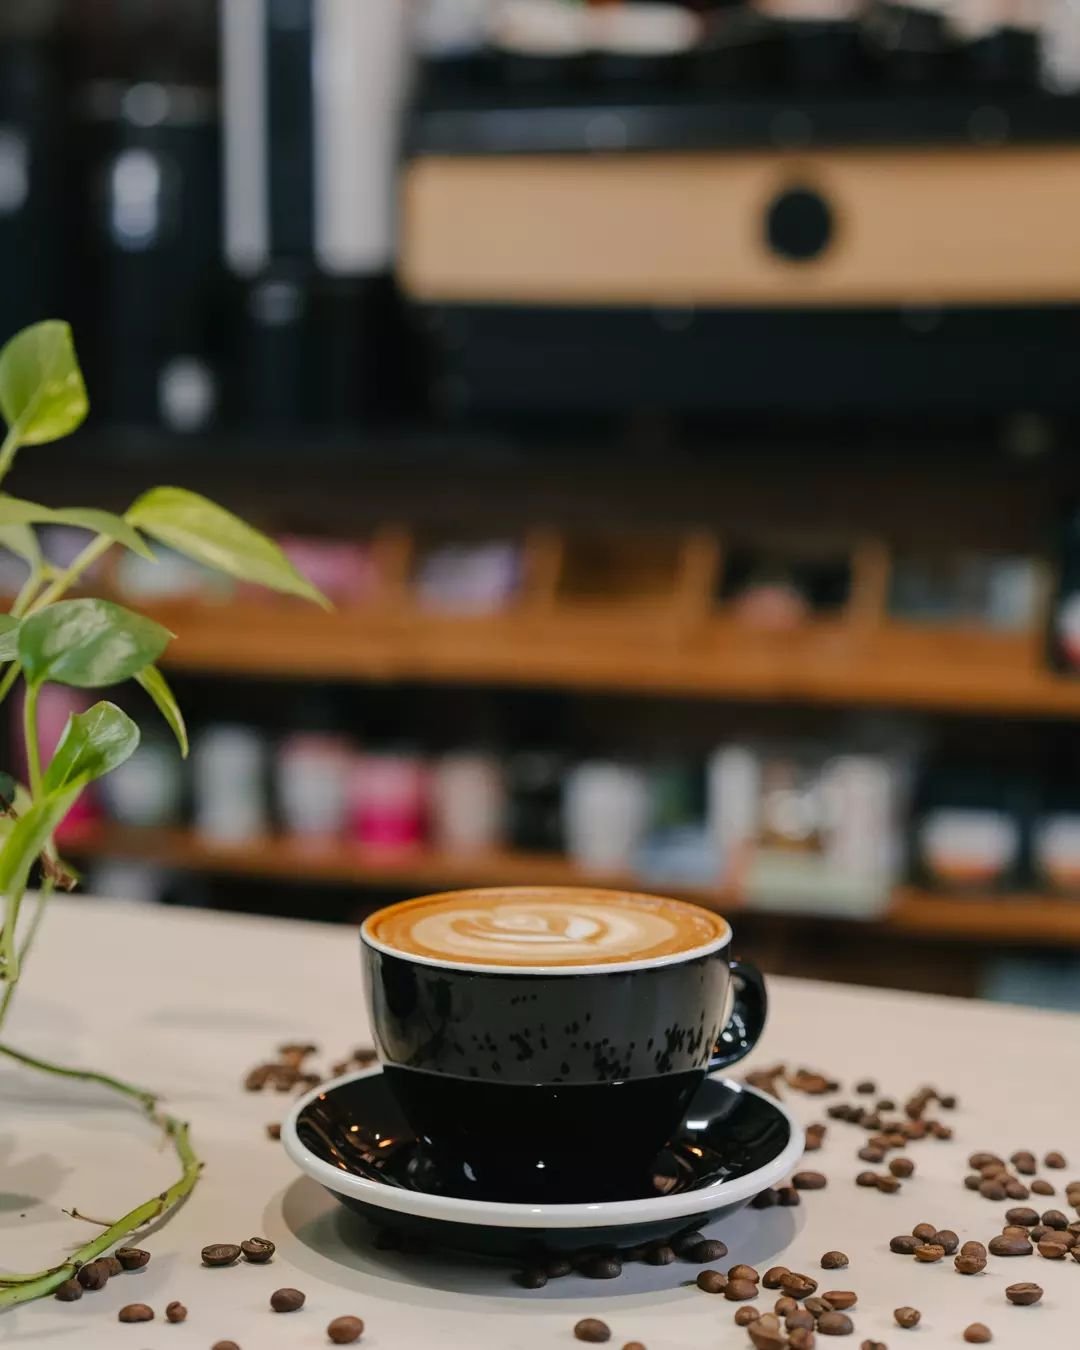 Your daily dose of delight awaits. 🌱☕ Grab a cup of pure perfection at Concept Coffee &mdash; no ordinary brew, just extraordinary moments. 

#DailyGrind #CoffeeTime #PerfectPour #BaristaArt #ConceptCoffee